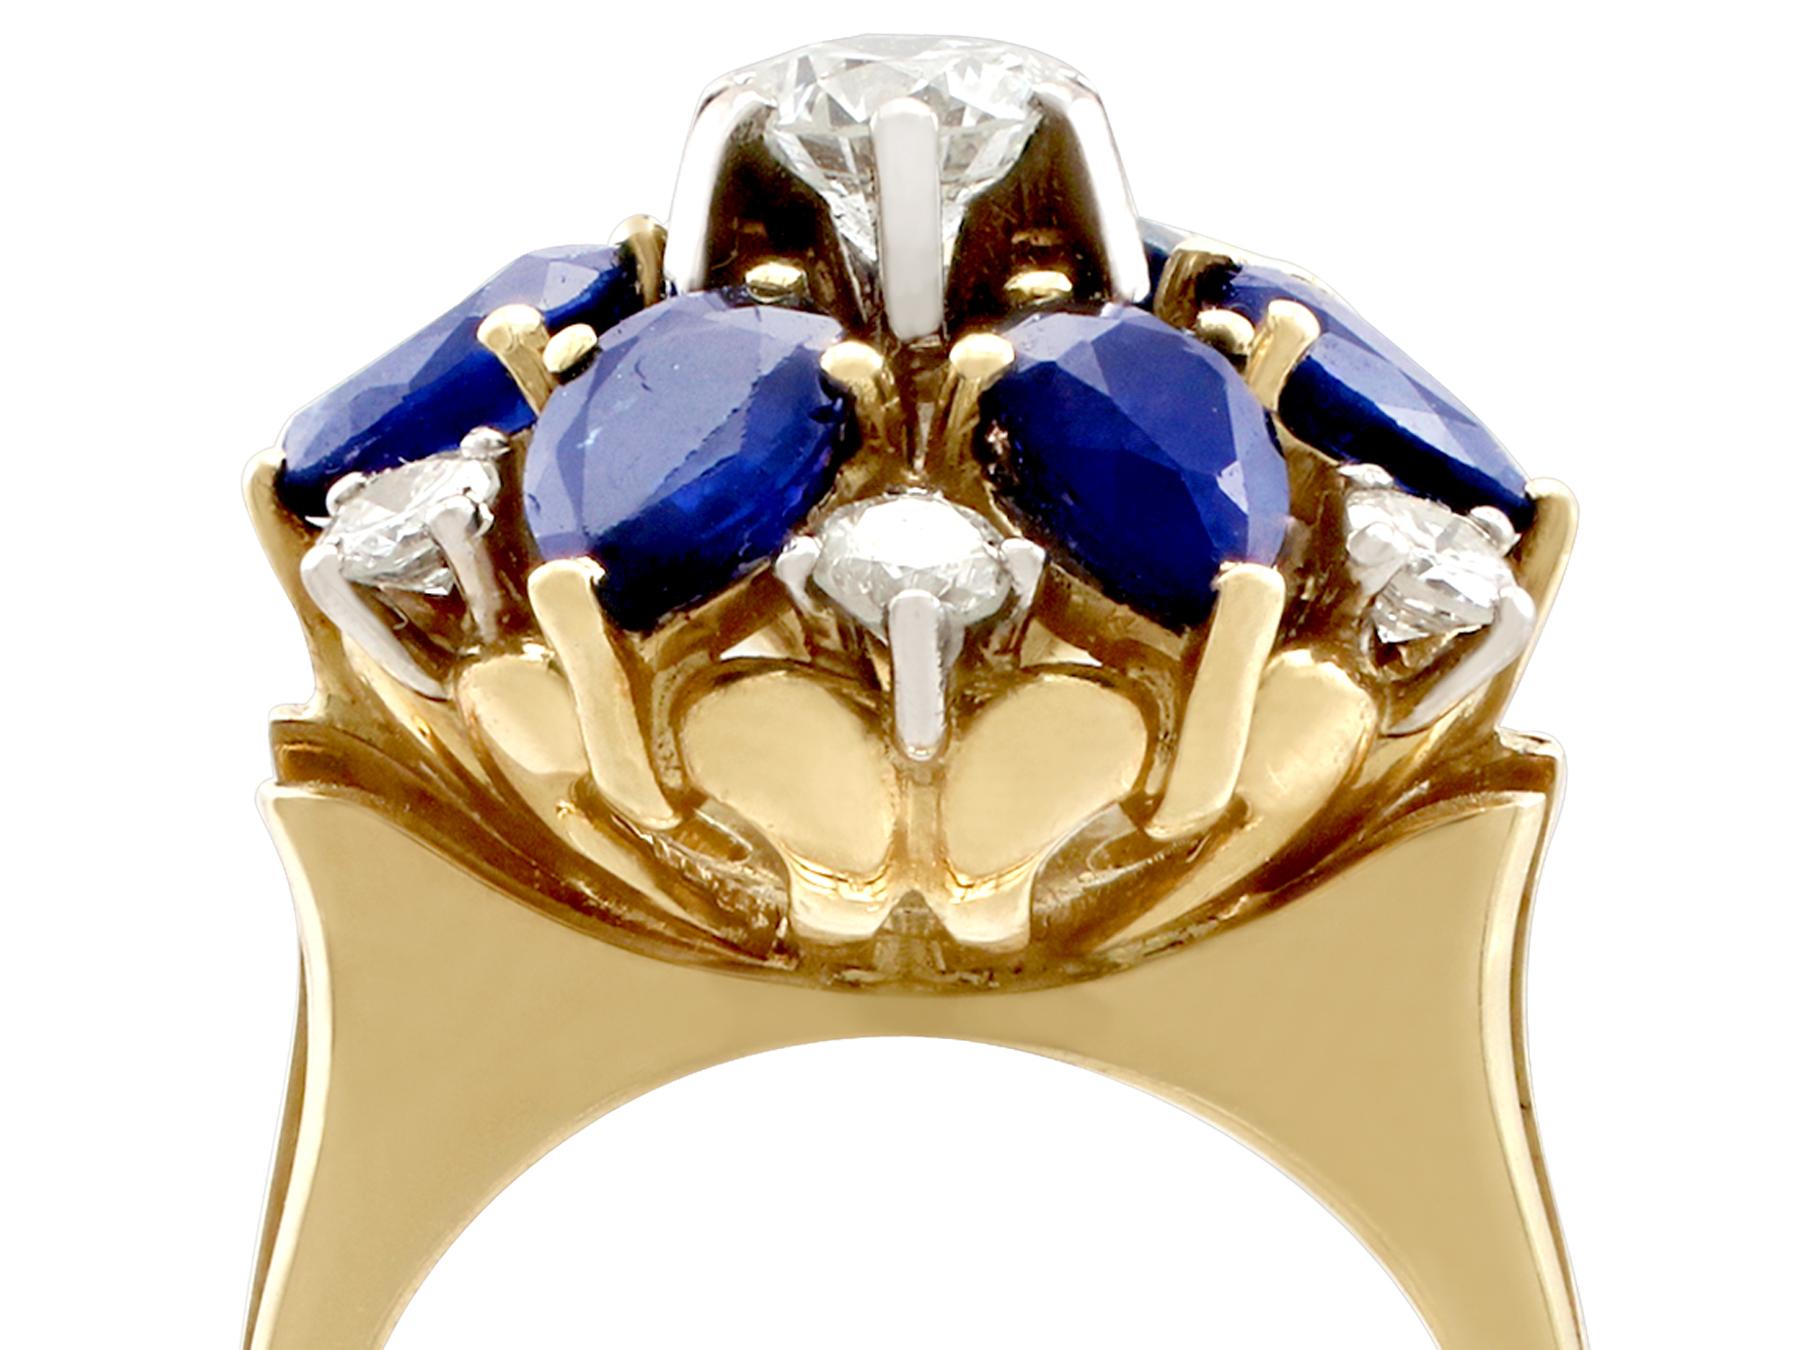 A stunning, fine and impressive 4.45 carat natural blue sapphire and 1.15 carat diamond, 18 karat yellow gold and 18 karat white set dress ring; part of our vintage jewelry and estate jewelry collections

This stunning, fine and impressive, vintage